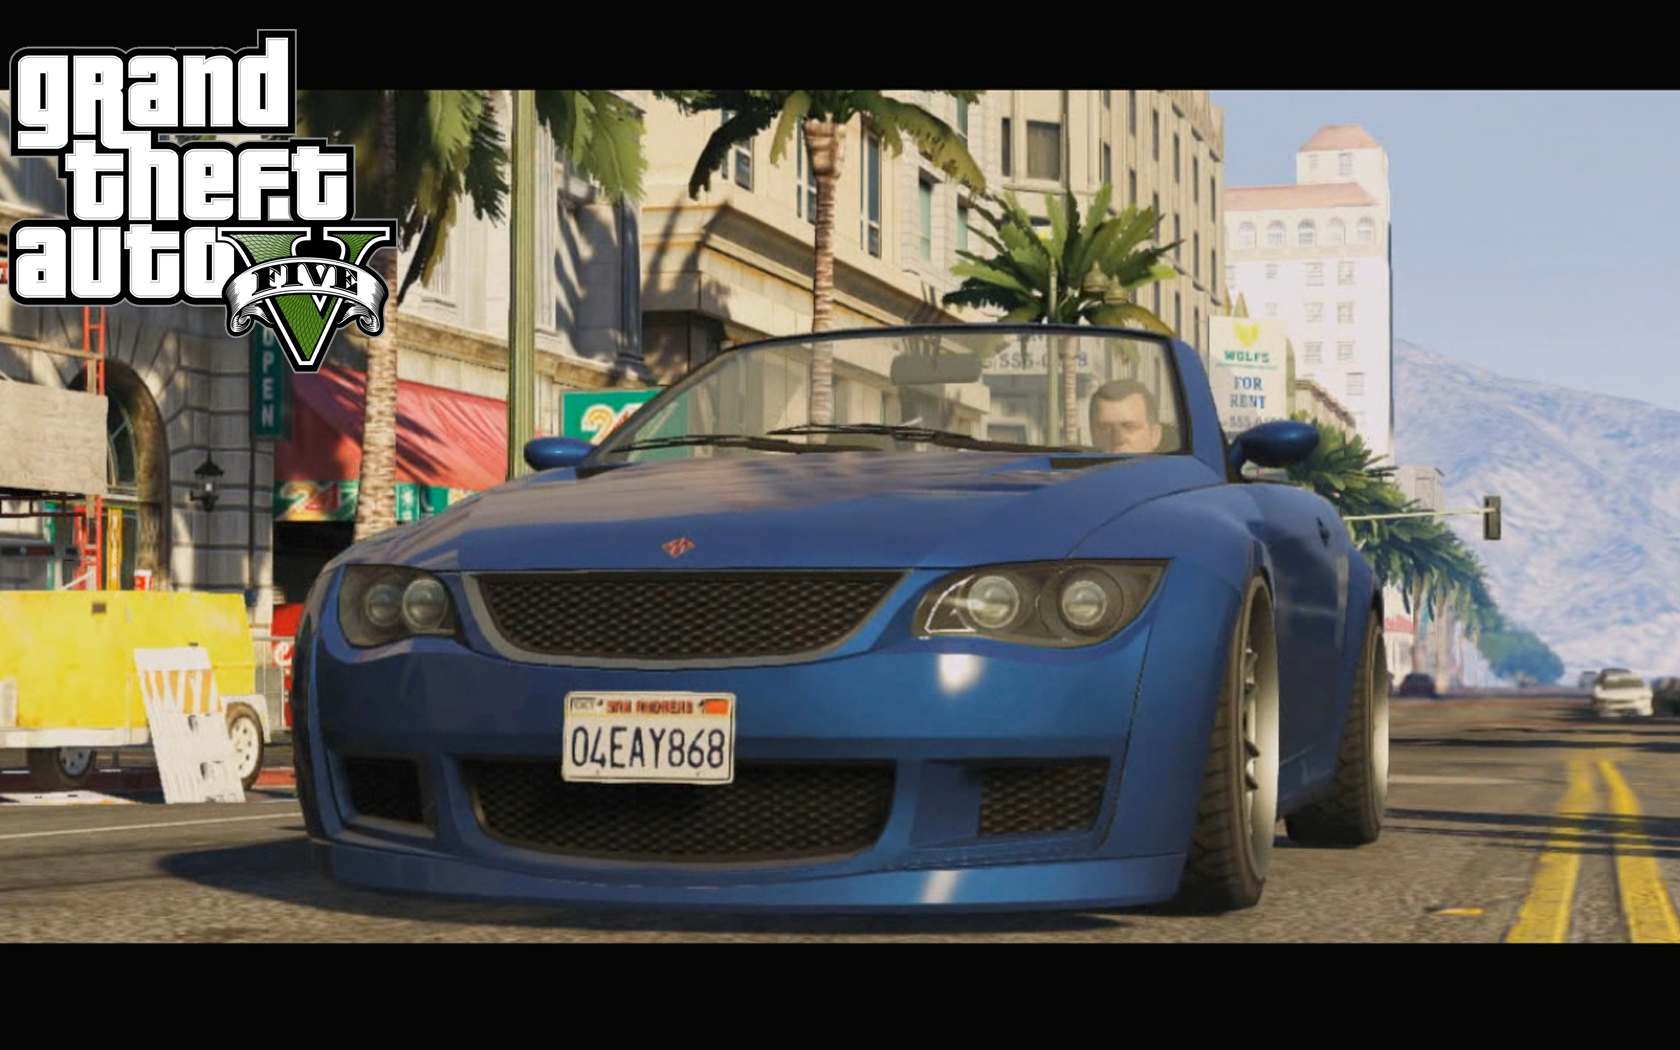 From Gta Cars Photos Cool Car Wallpaper For Your Choice